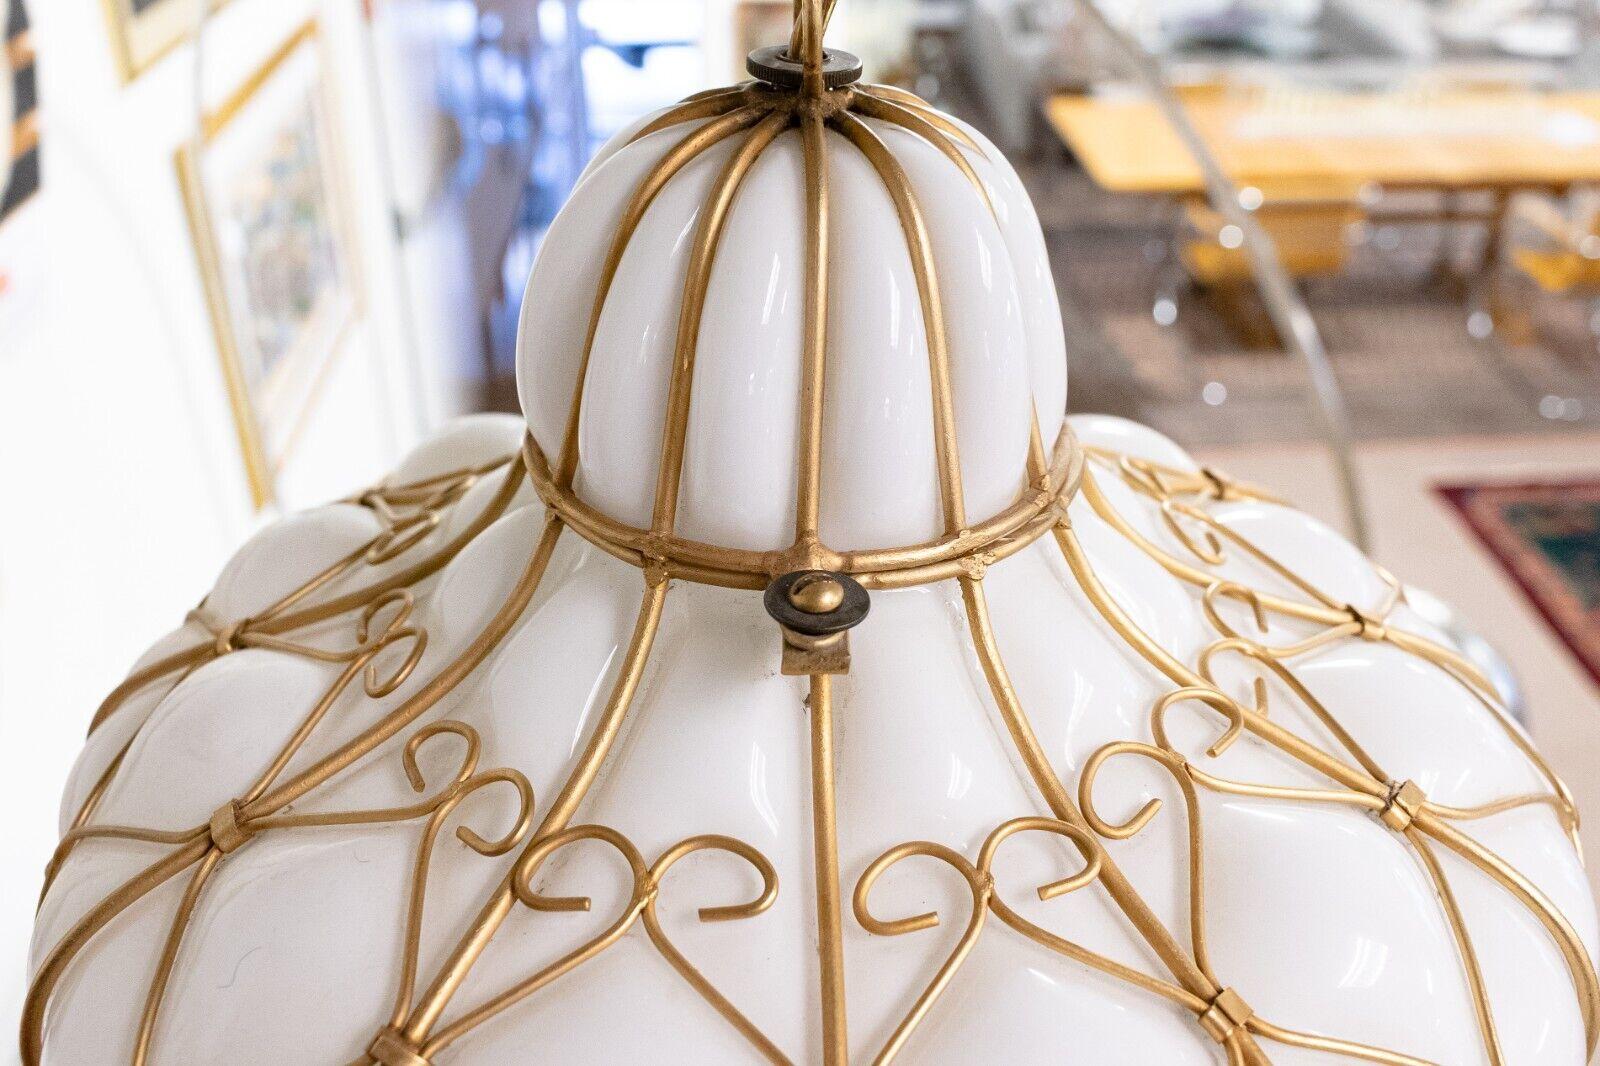 A hollywood regency milk glass caged teardrop light fixture. This is a wonderful pendant light fixture that features a gorgeous white milk glass construction, and a gilded sculptural frame around that. This piece hangs from an extra long matching